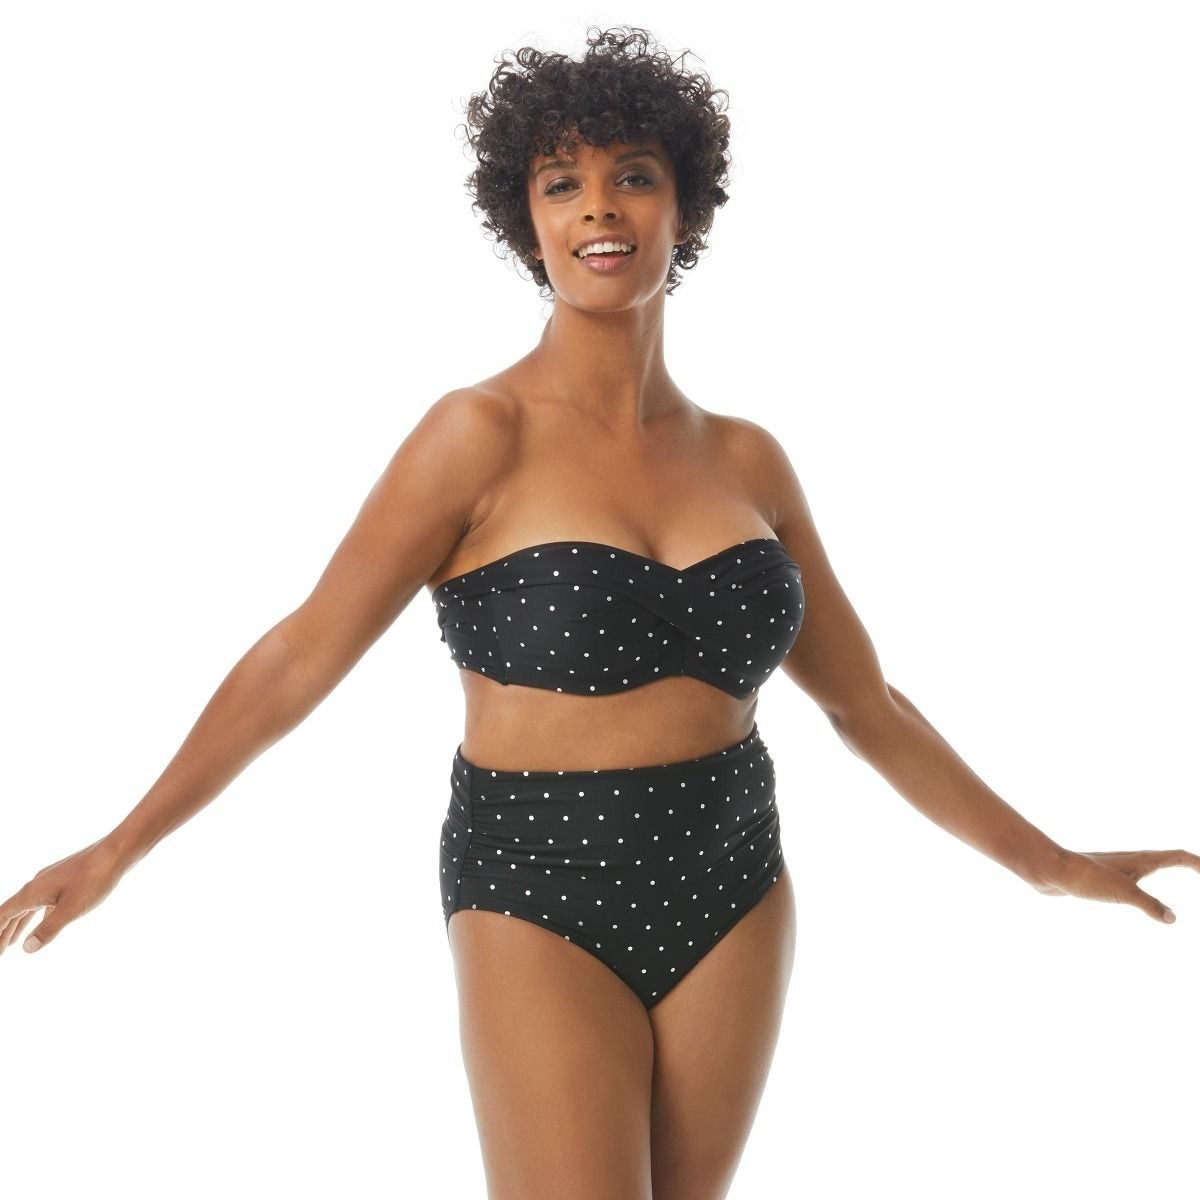 Shop Cute Swimsuit Picks For Every Body Type